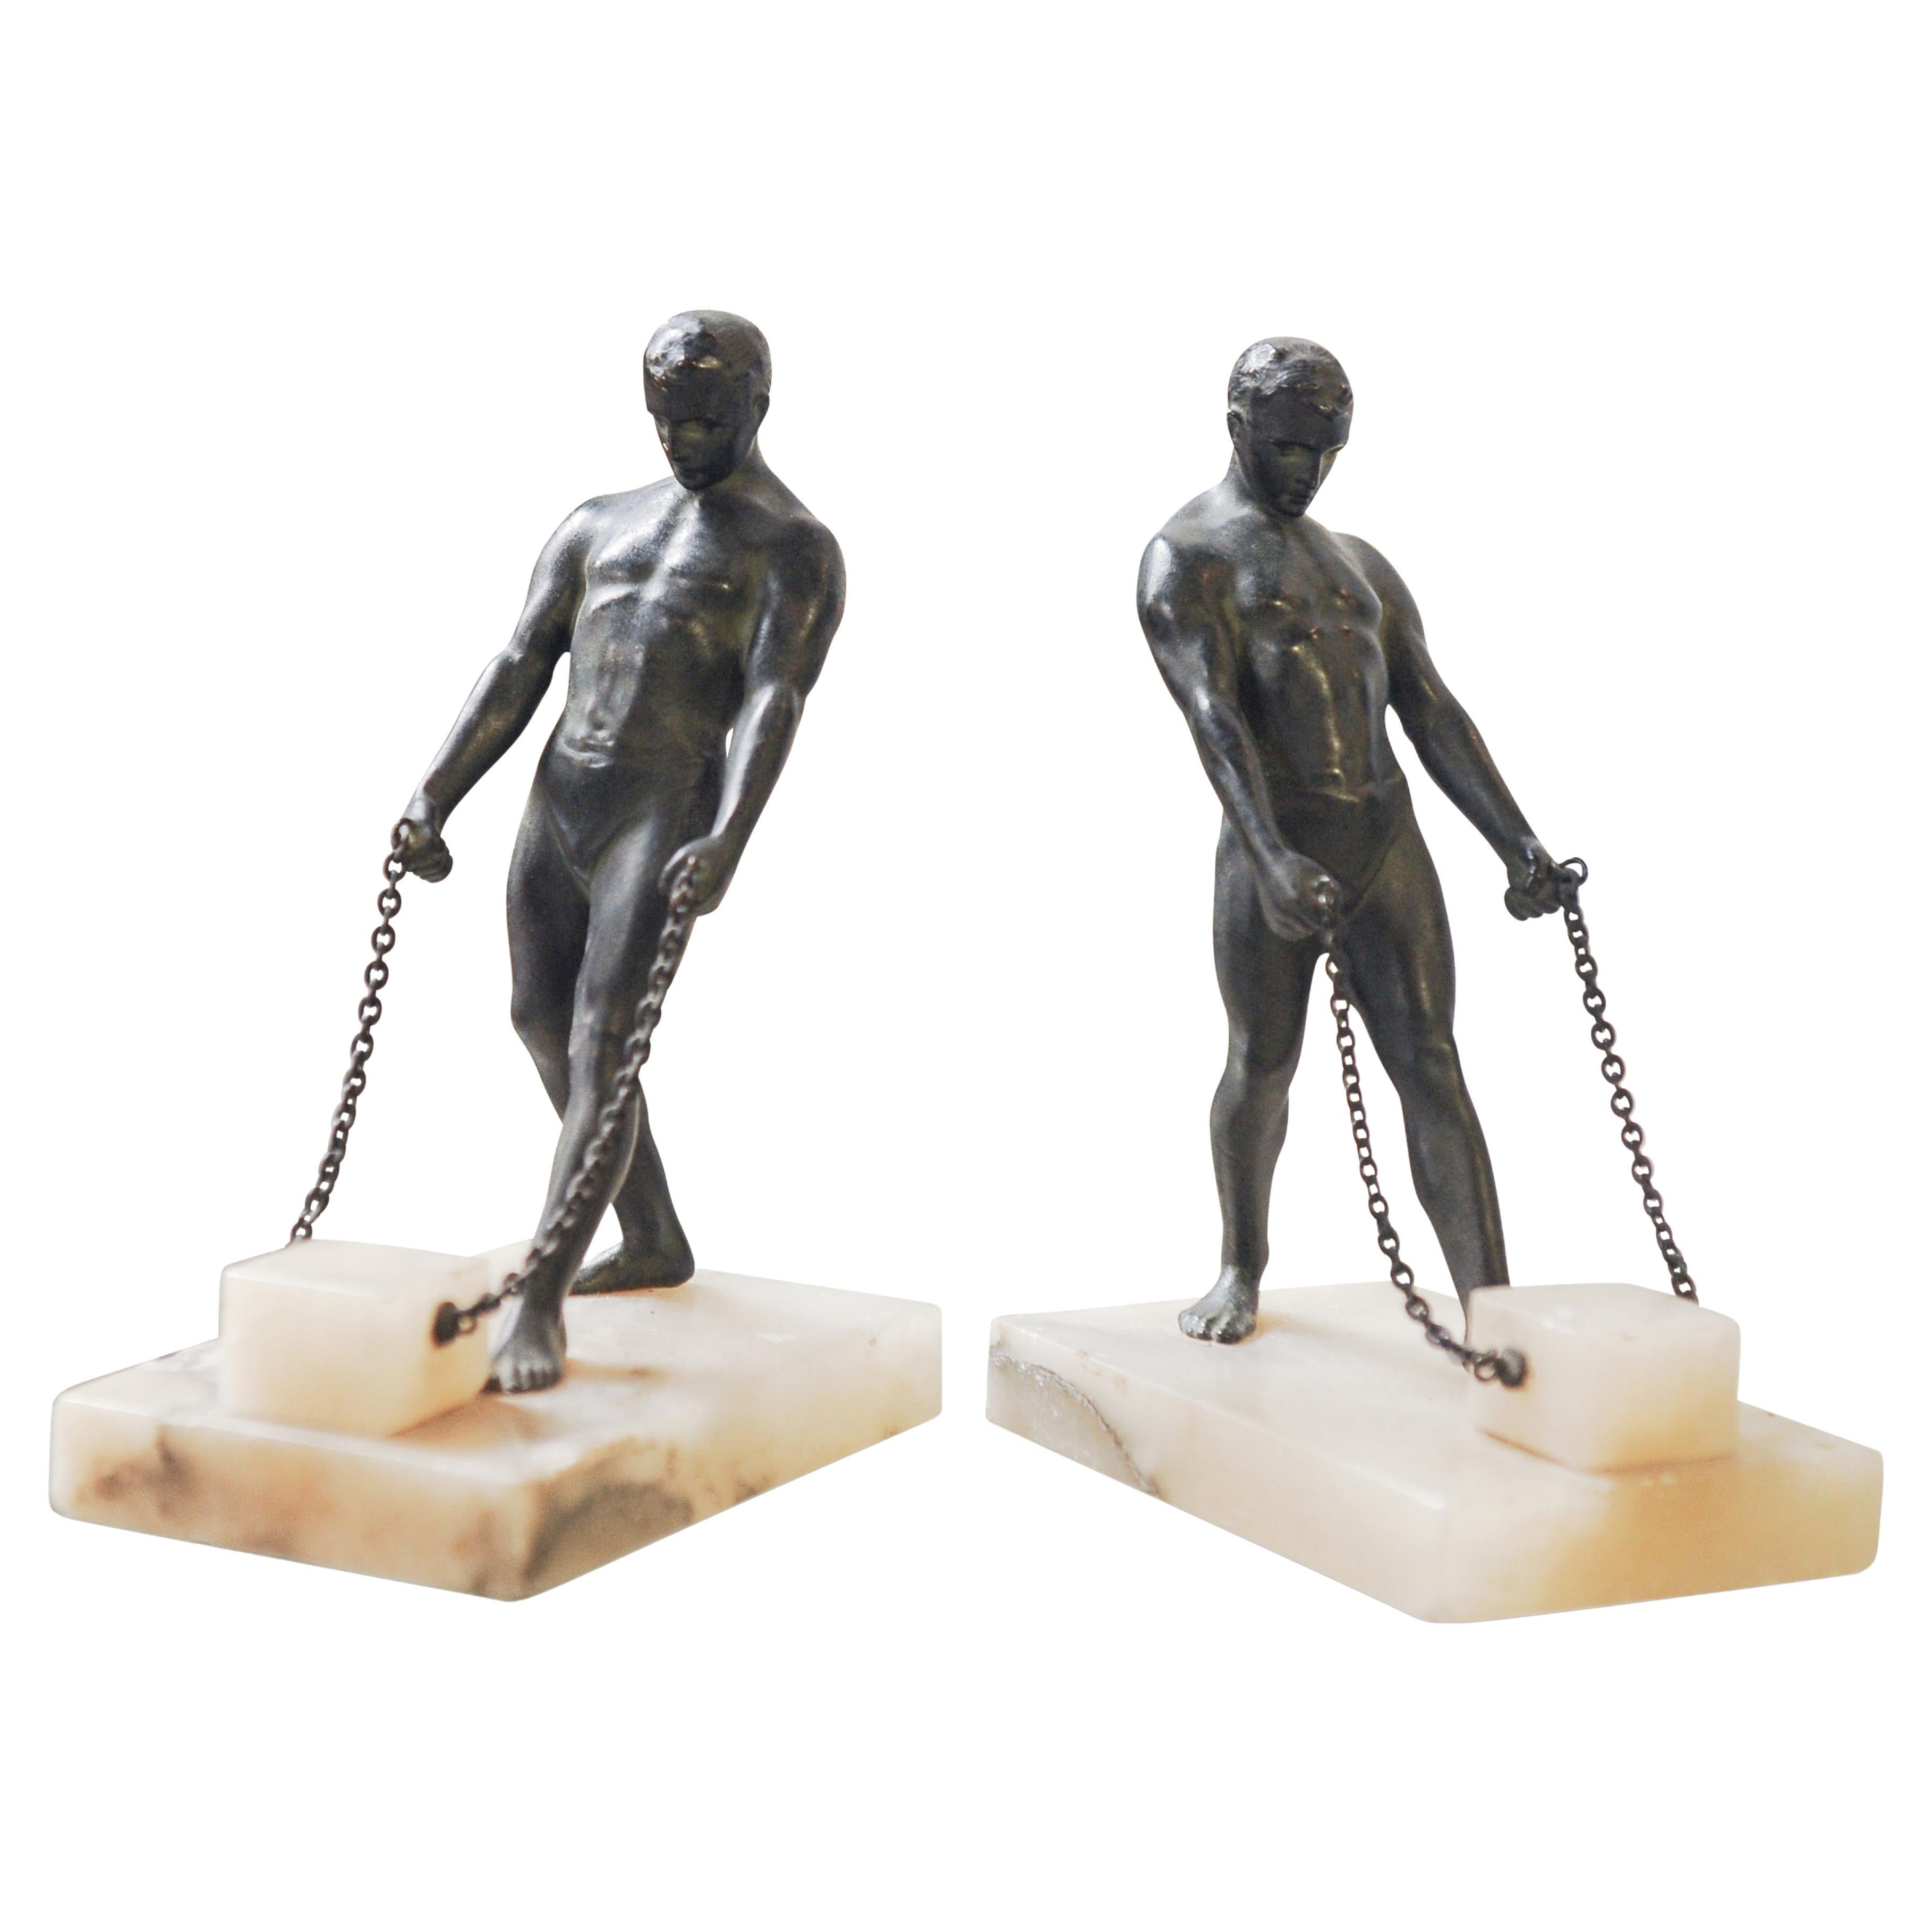 A Stunning and Unusual Pair of Matching Grand Tour Bronze Spelter Greek Male Figurines on Alabaster Bases.

The Grand Tour was the principally 17th- to early 19th-century custom of a traditional trip through Europe, with Italy as a key destination,